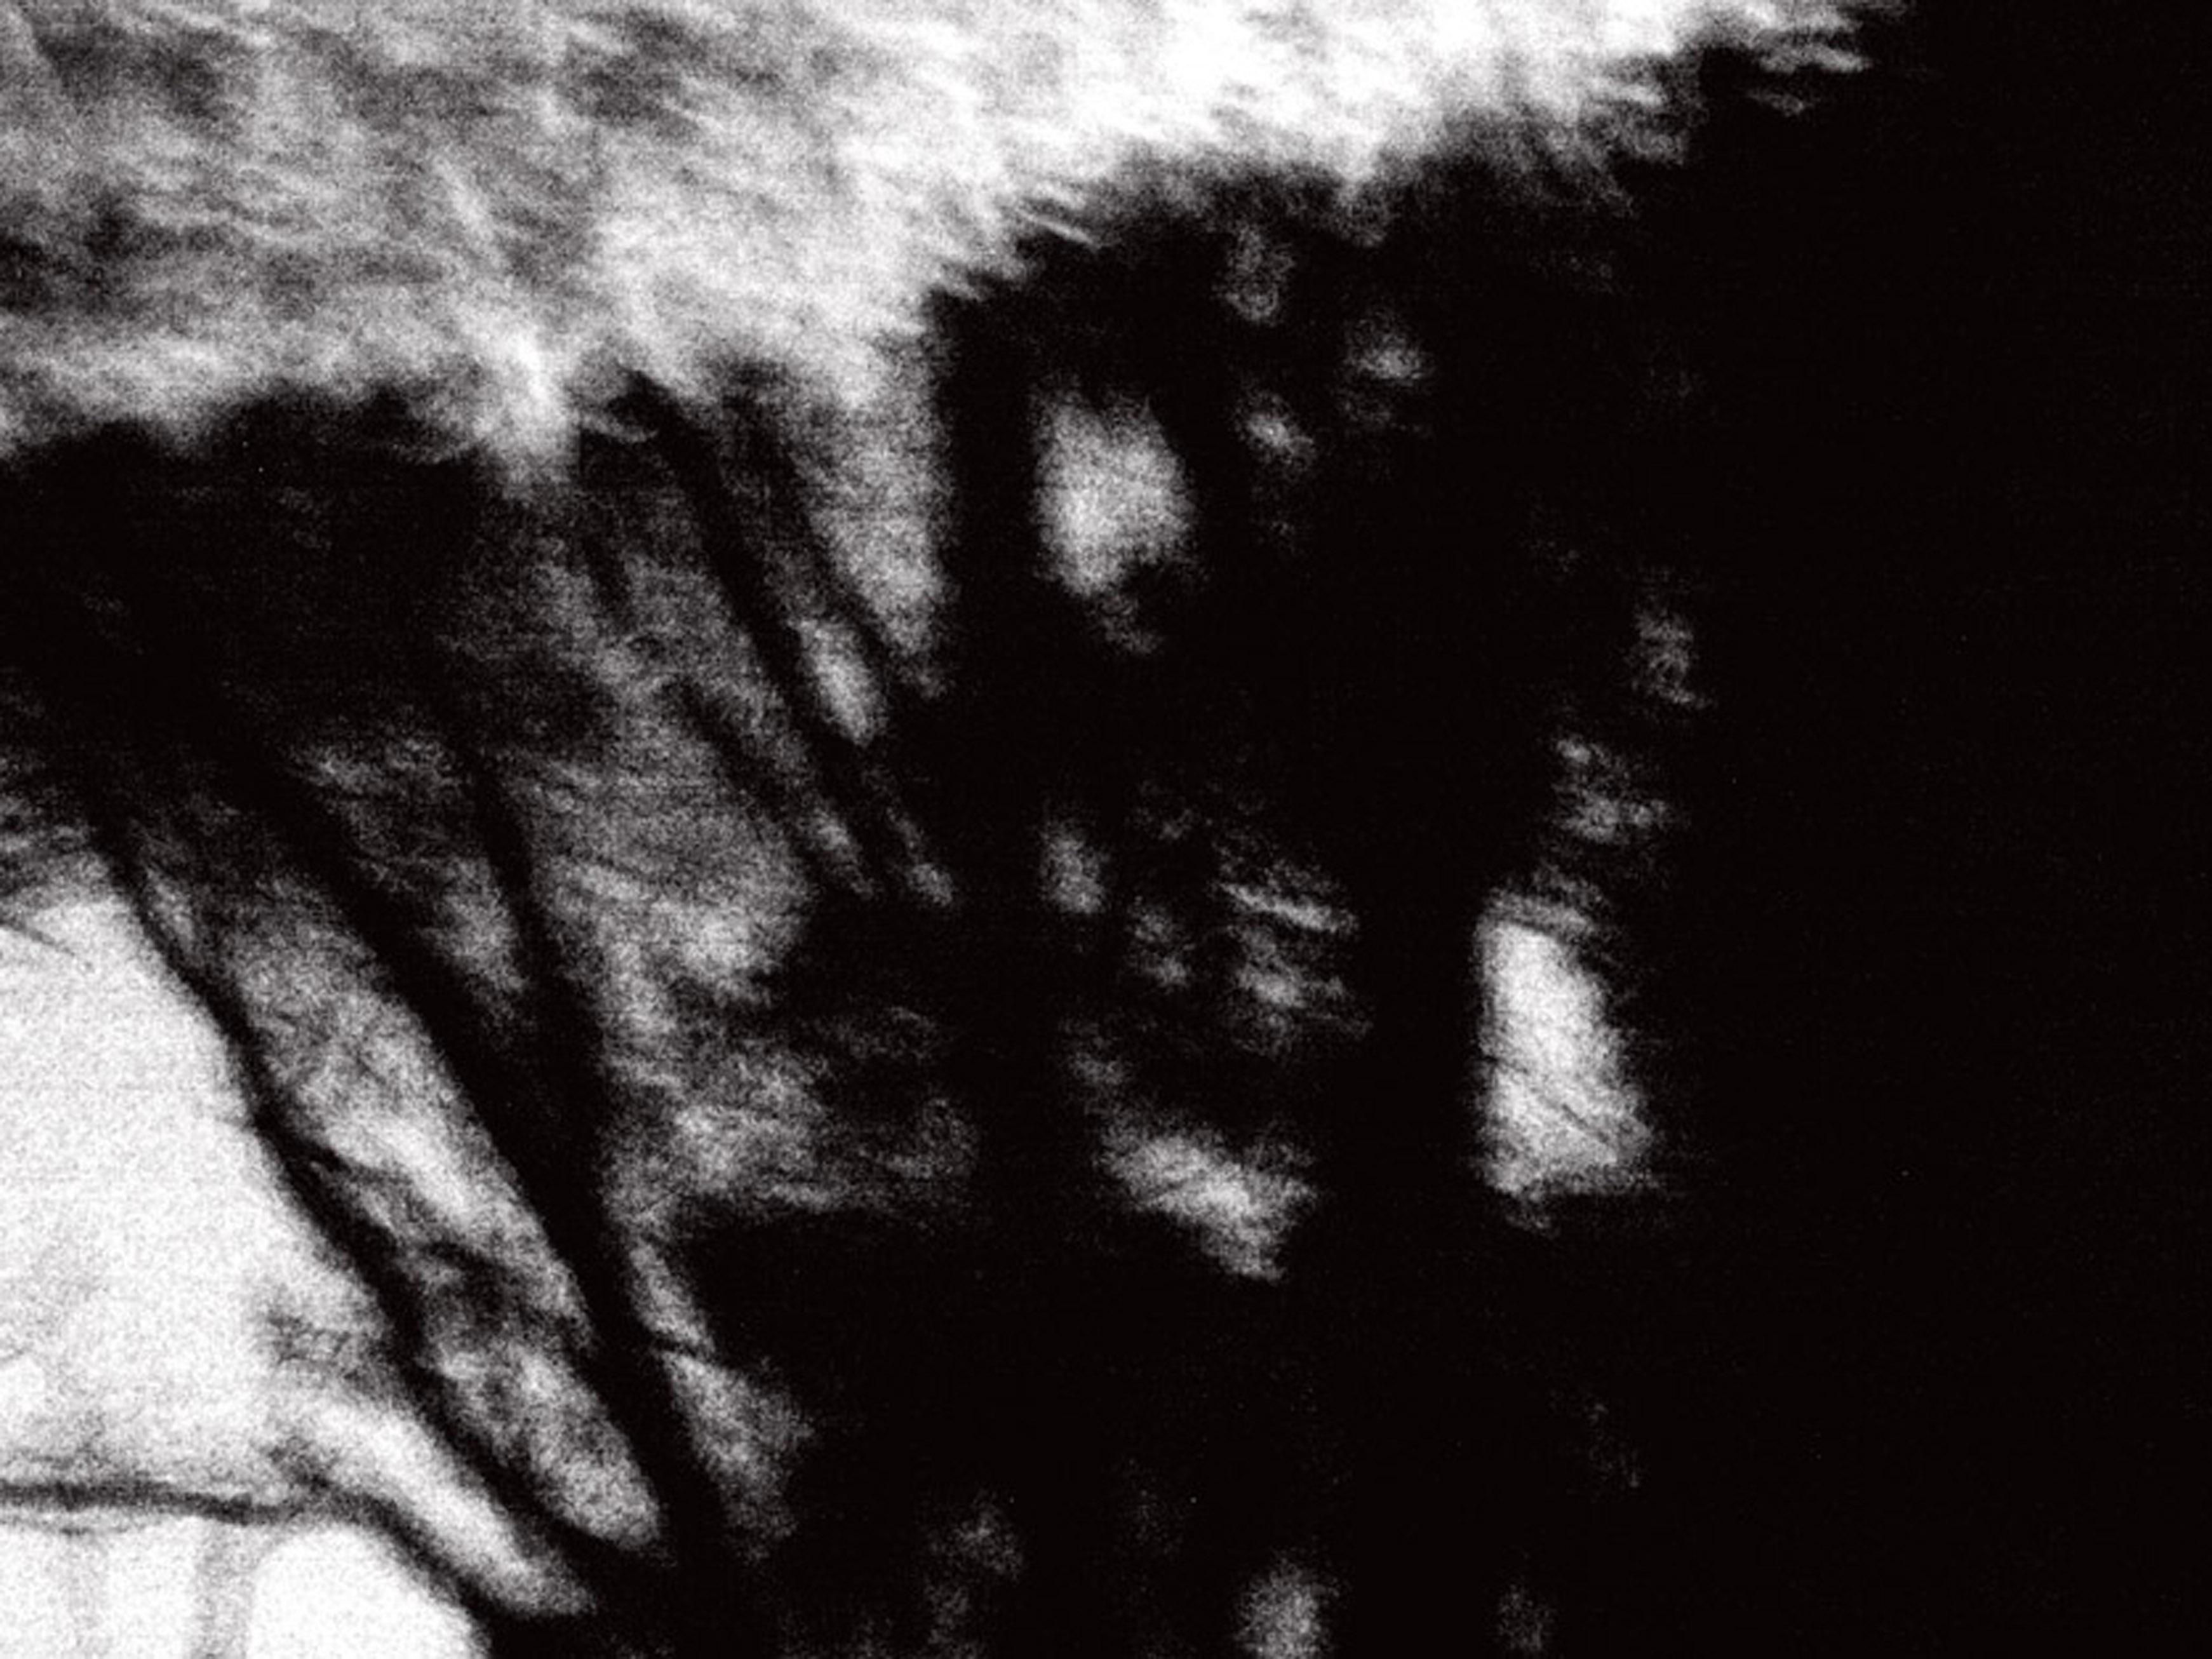 Susan Grissom Black and White Photograph - Night Trees, Photograph, Archival Ink Jet